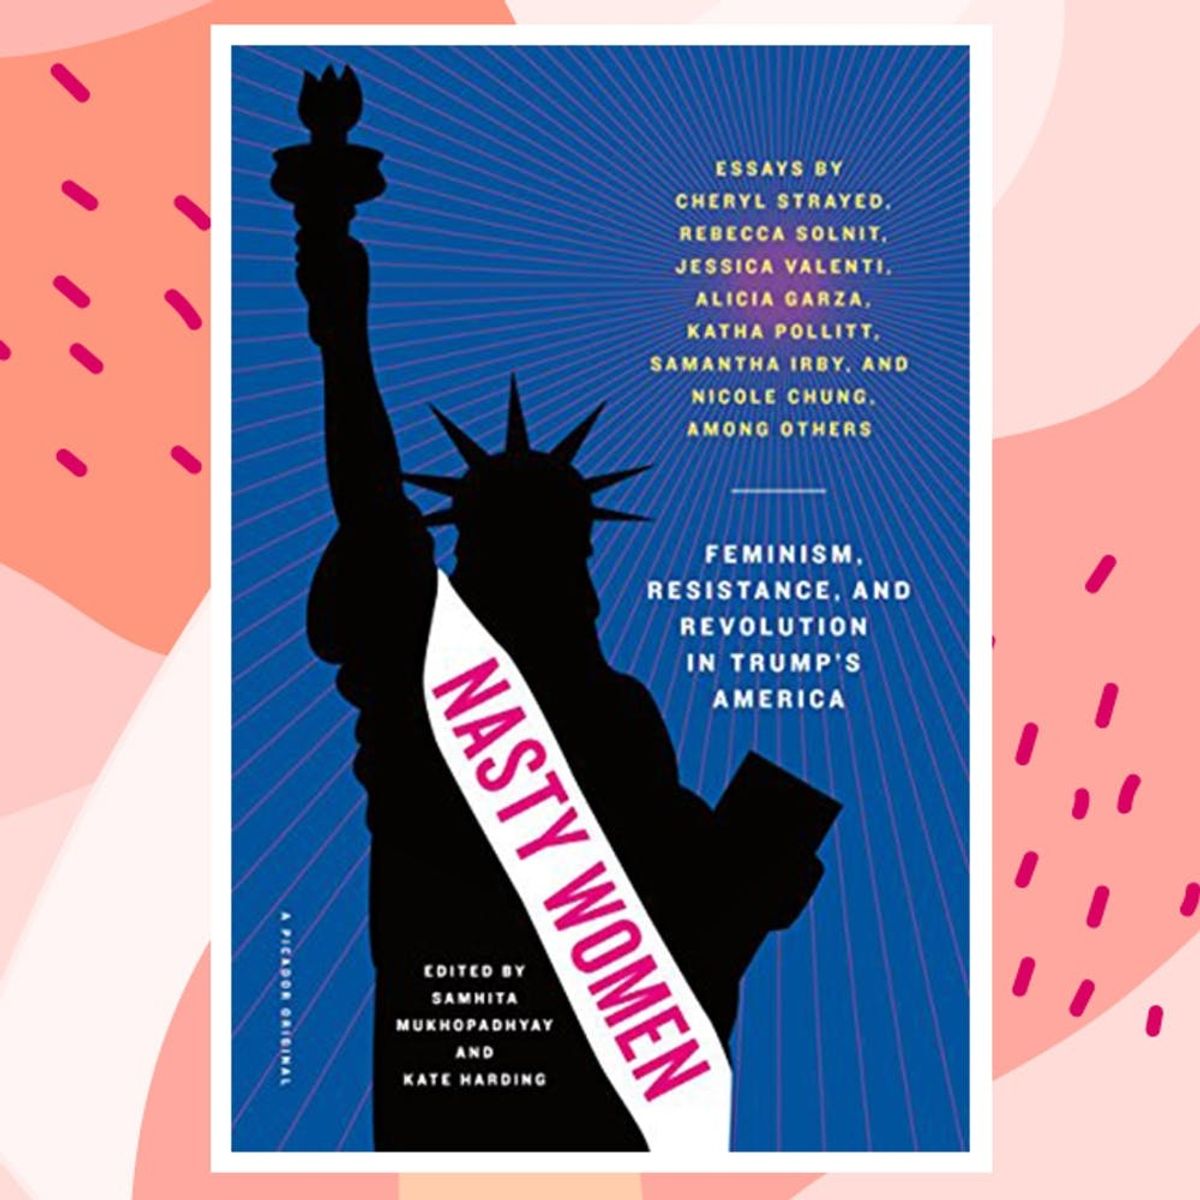 A Chat With the Authors of “Nasty Women,” a New Book About Being Feminist in 2017